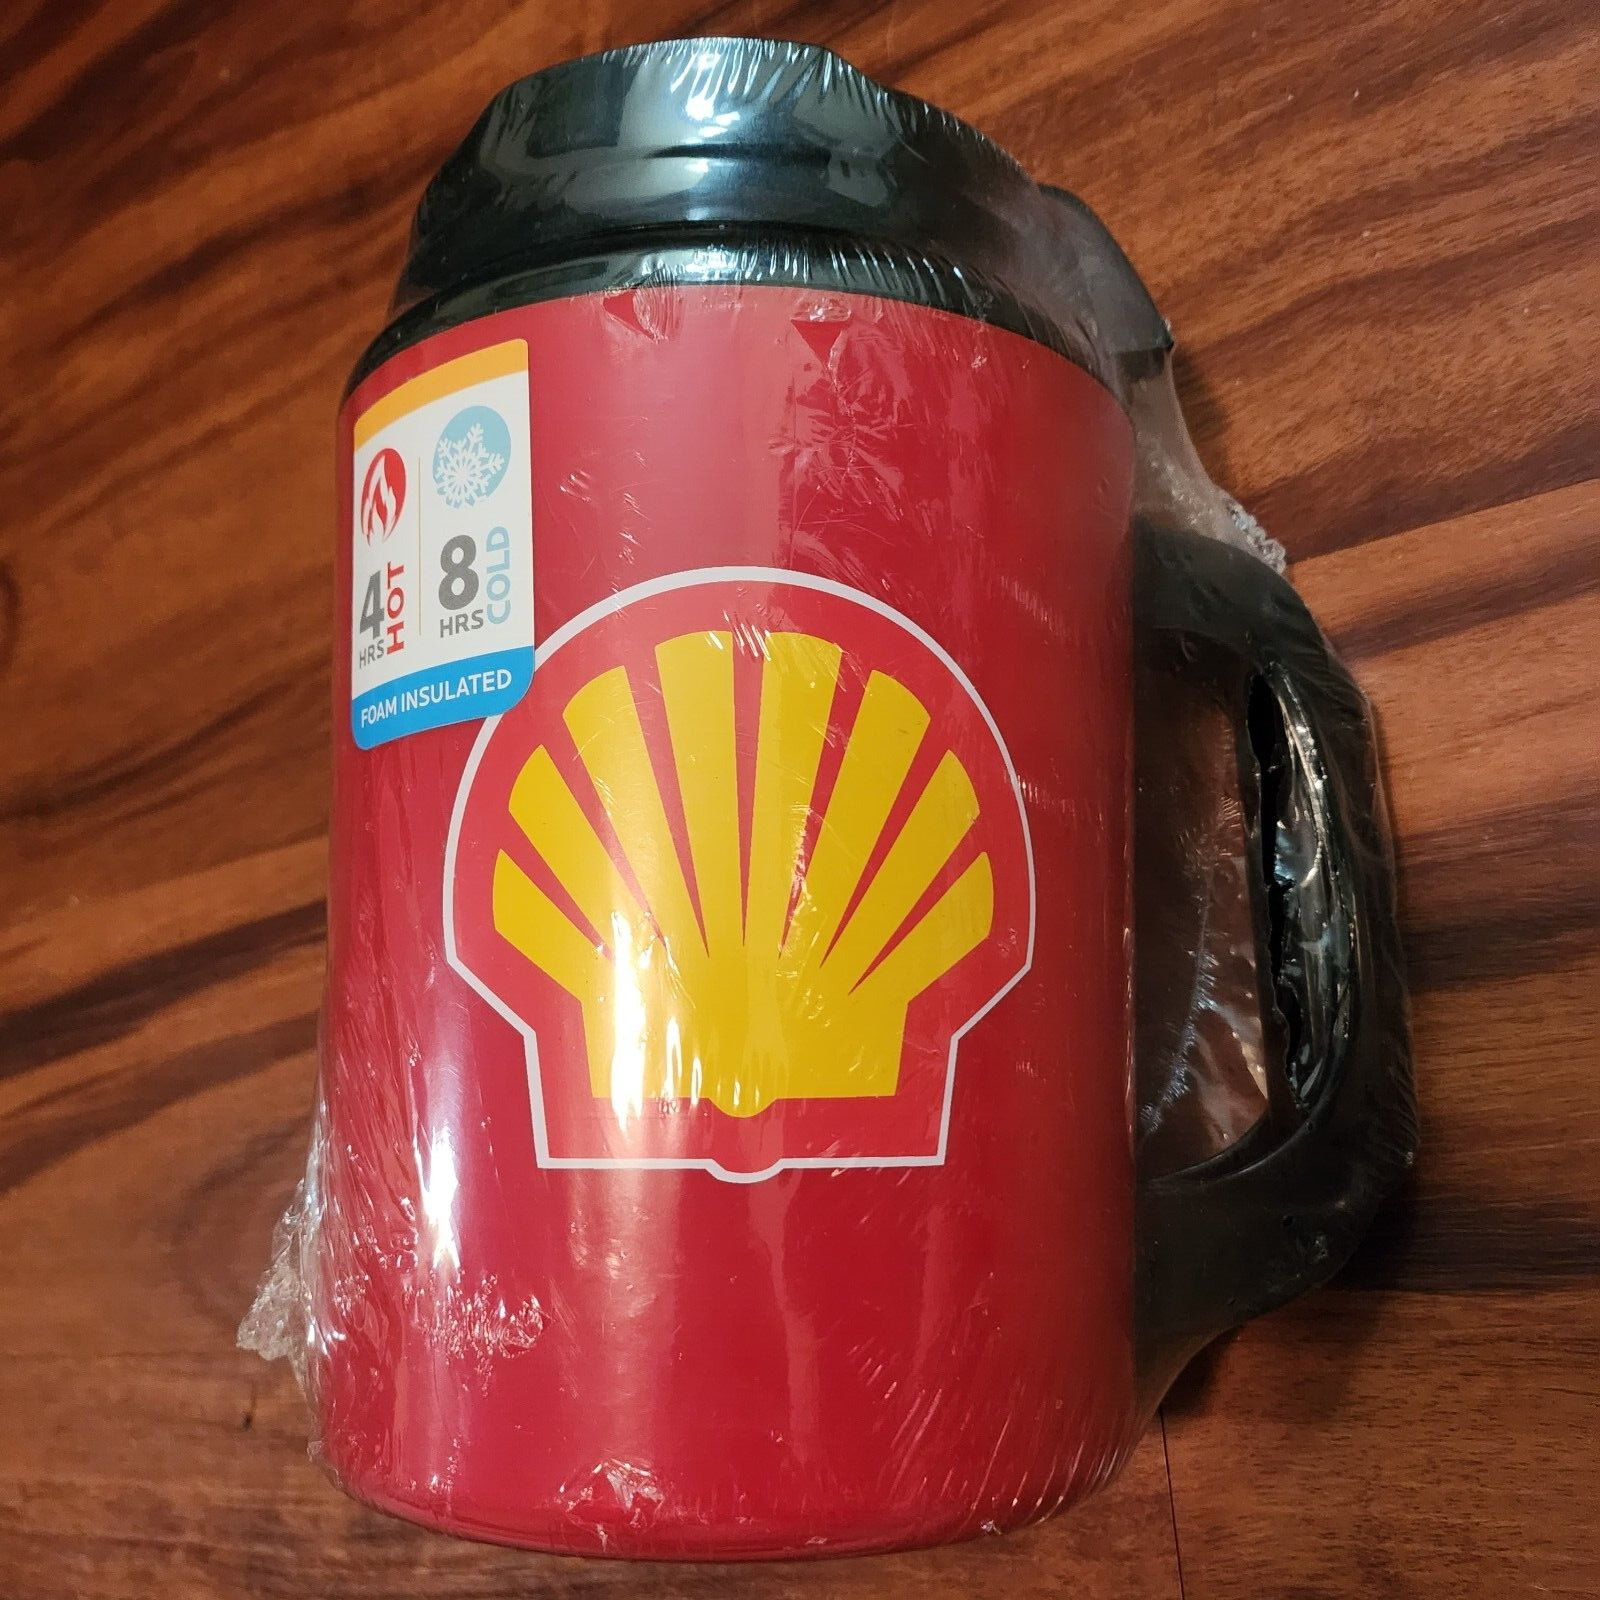 Thermoserv Jumbo Insulated Hot/Cold Mug Cup Shell Oil